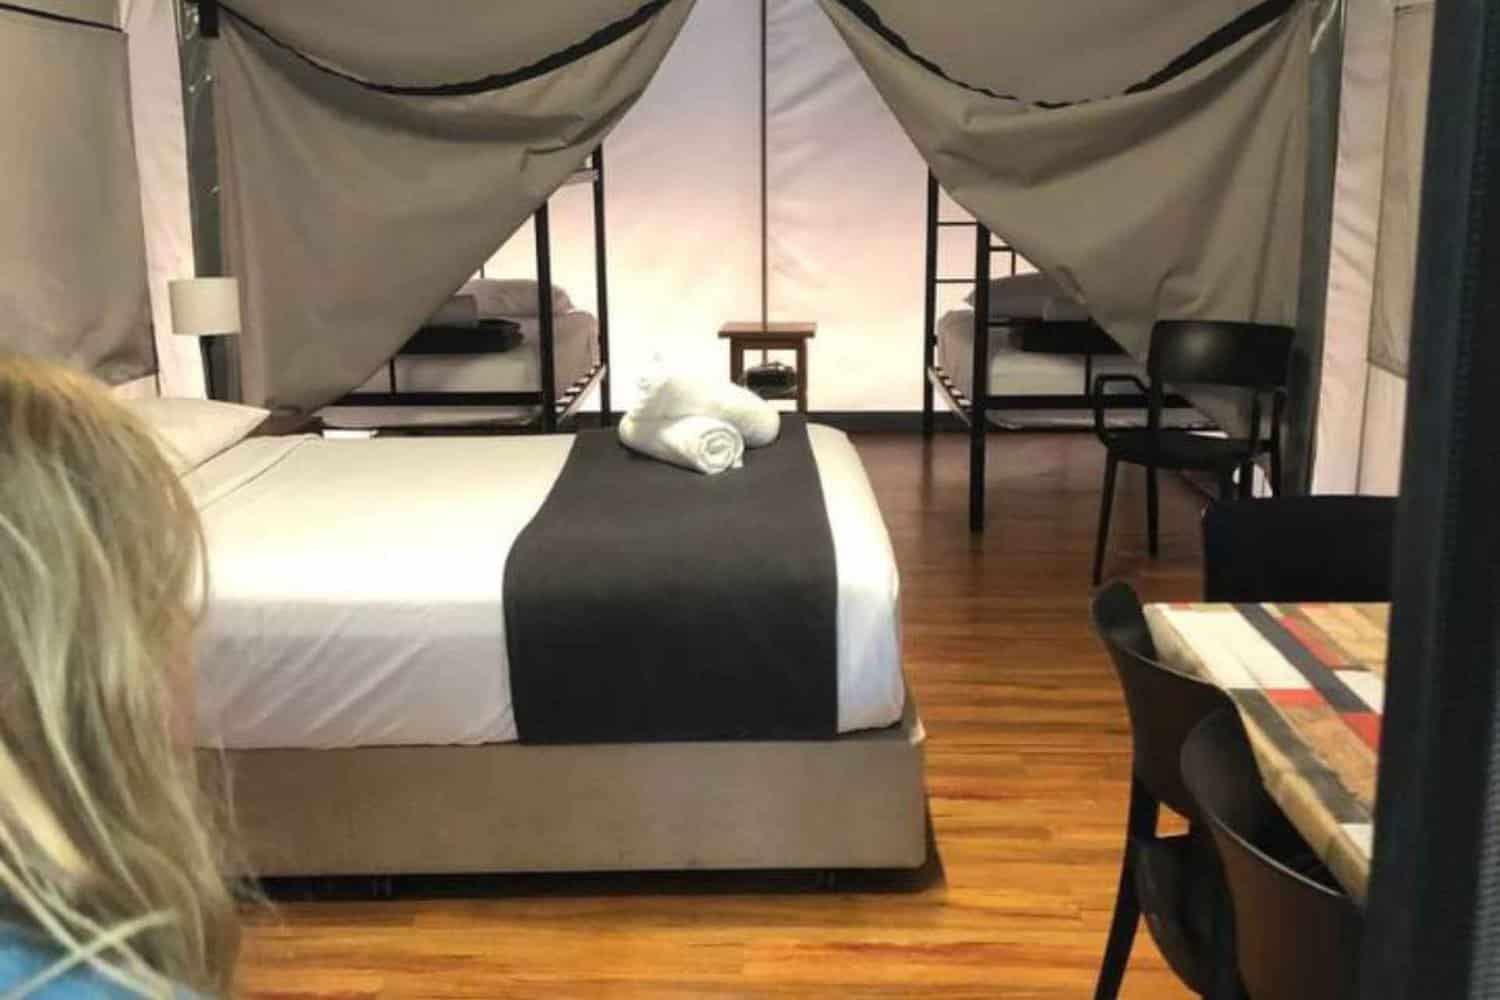 Unique hotel room setup with safari tent-style draping over the beds, wooden flooring, and modern furnishings, creating an adventurous yet luxurious atmosphere for guests.